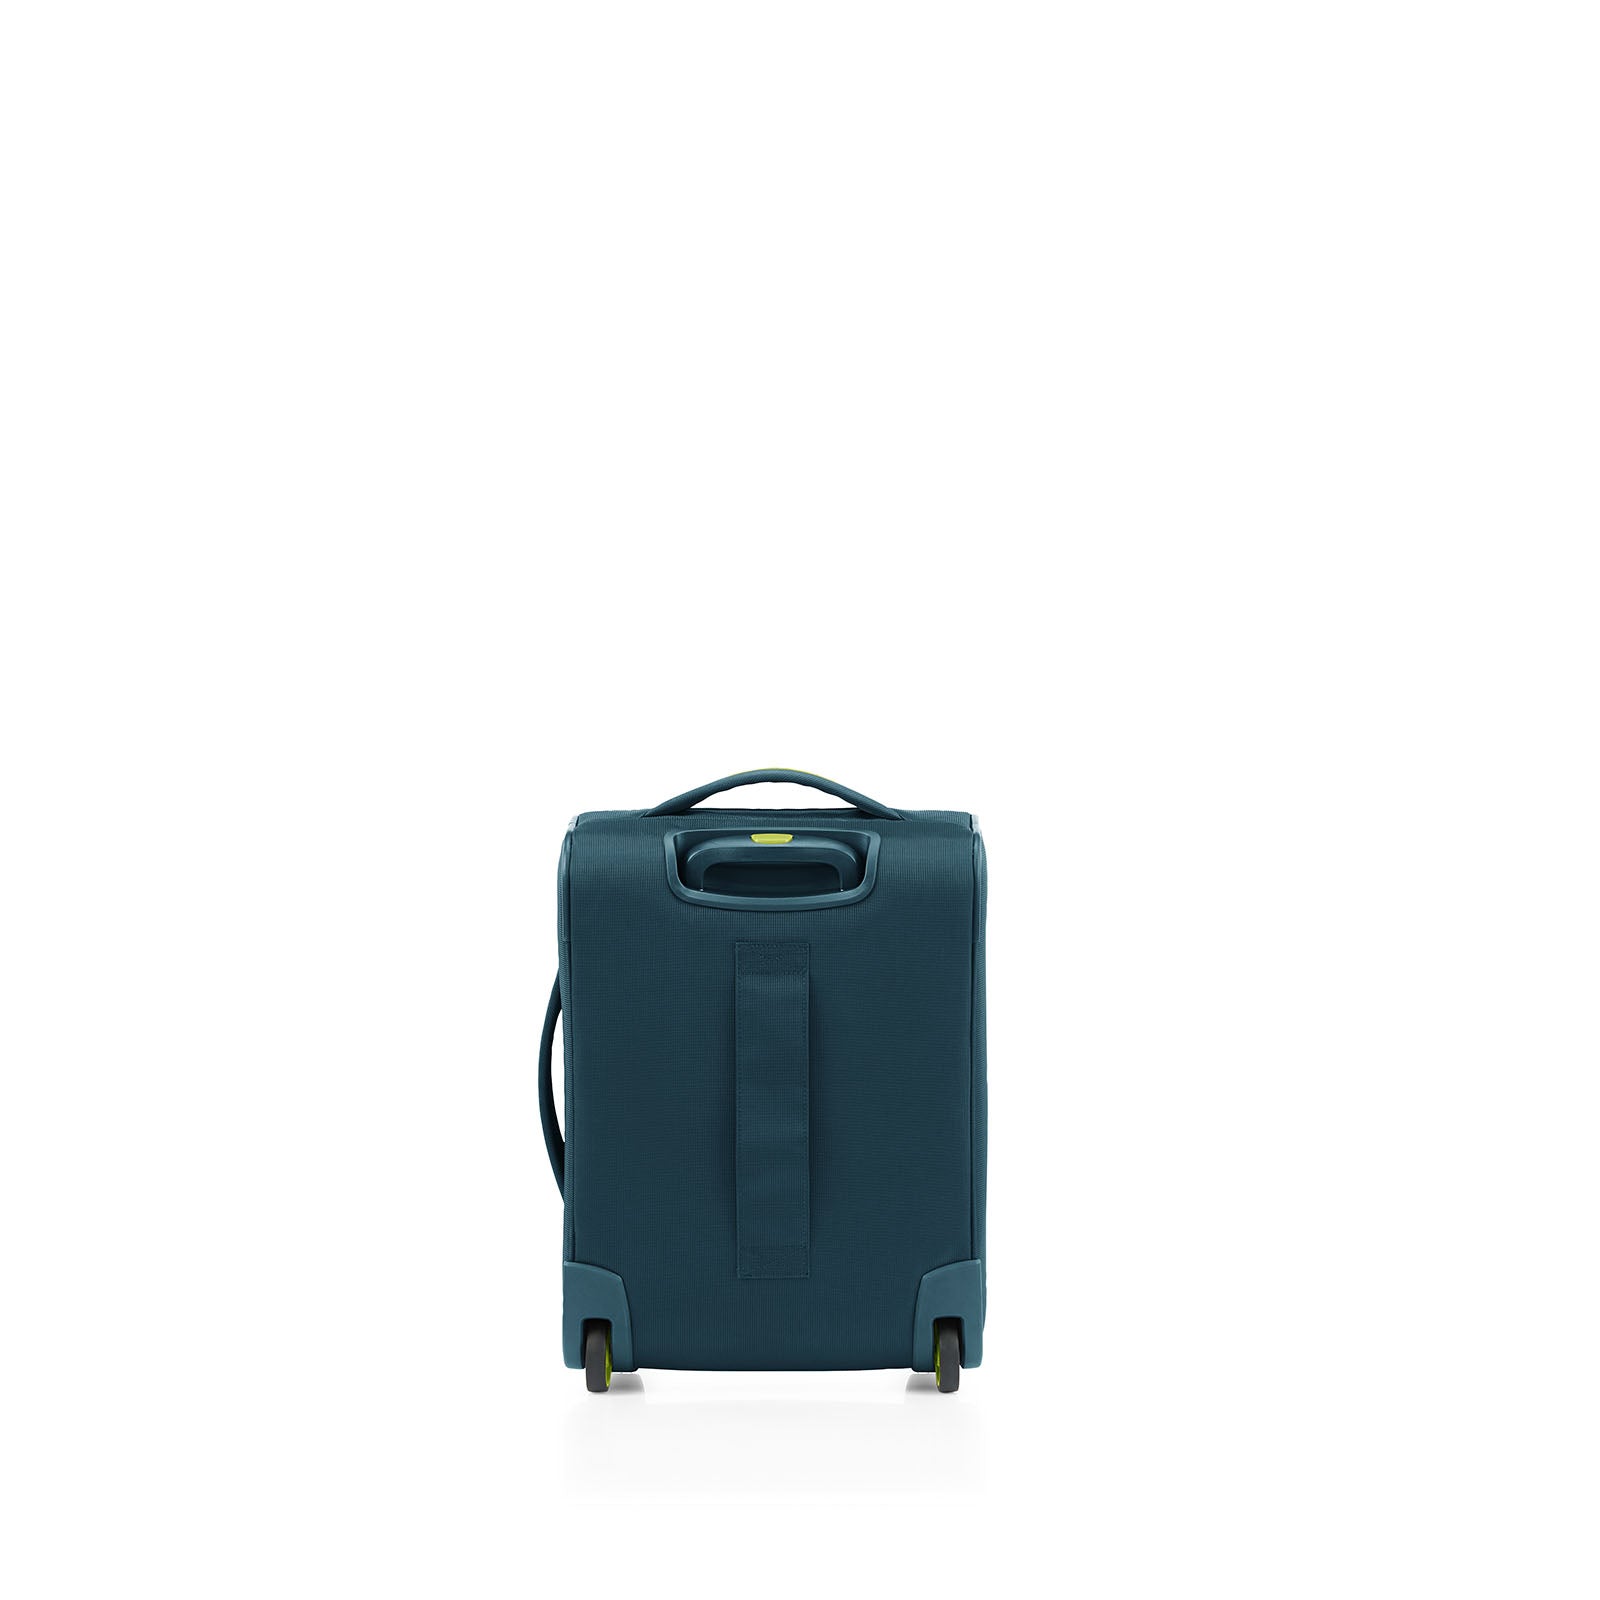 American-Tourister-Applite-4-Eco-50cm-Carry-On-Suitcase-Varsity-Green-Back